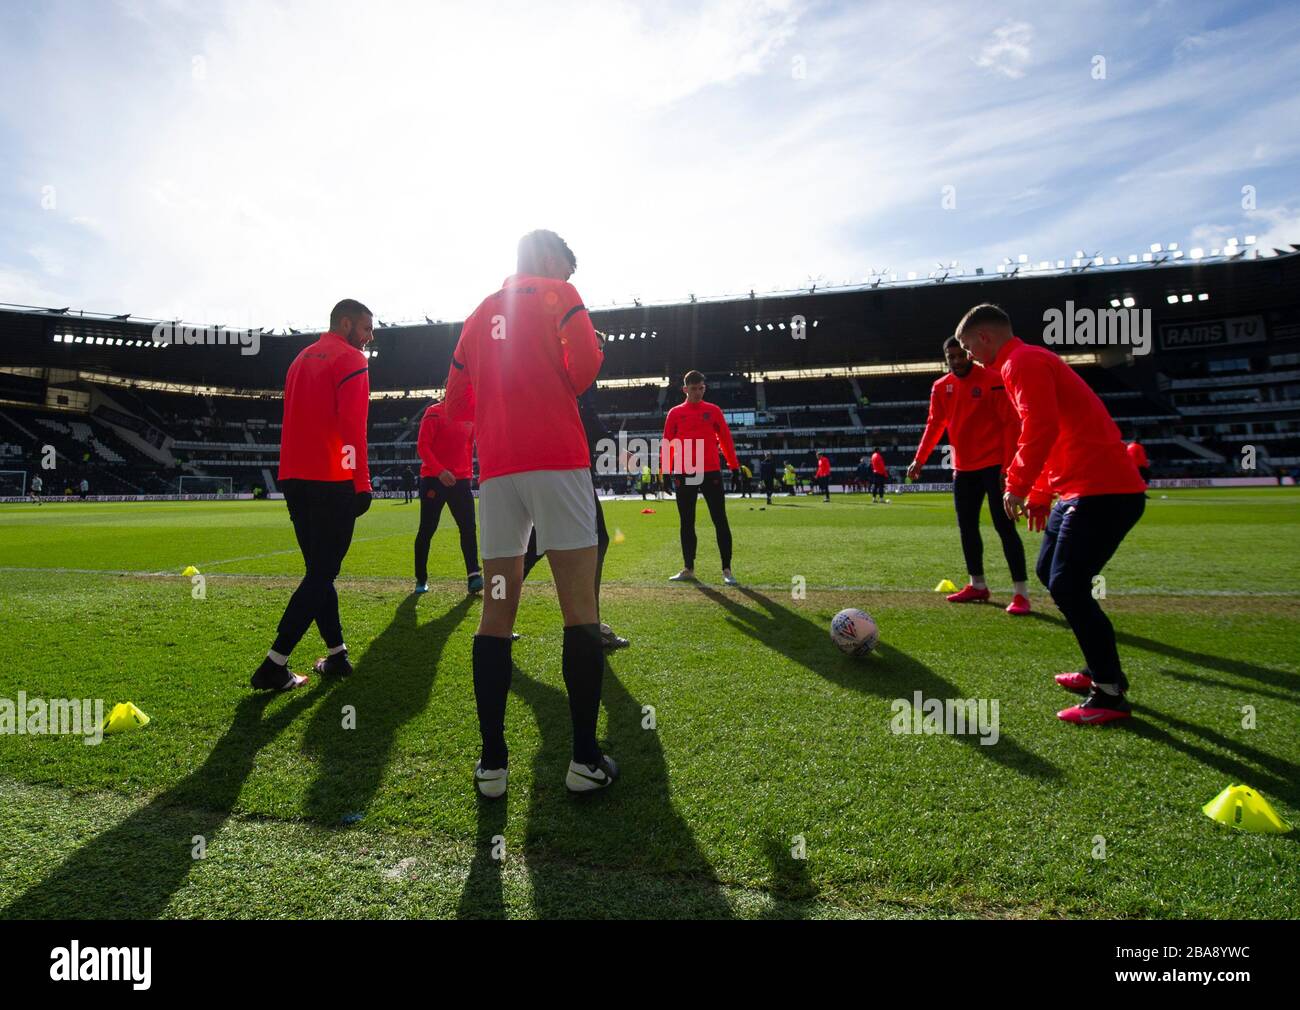 A general view of Blackburn Rovers players warming up Stock Photo